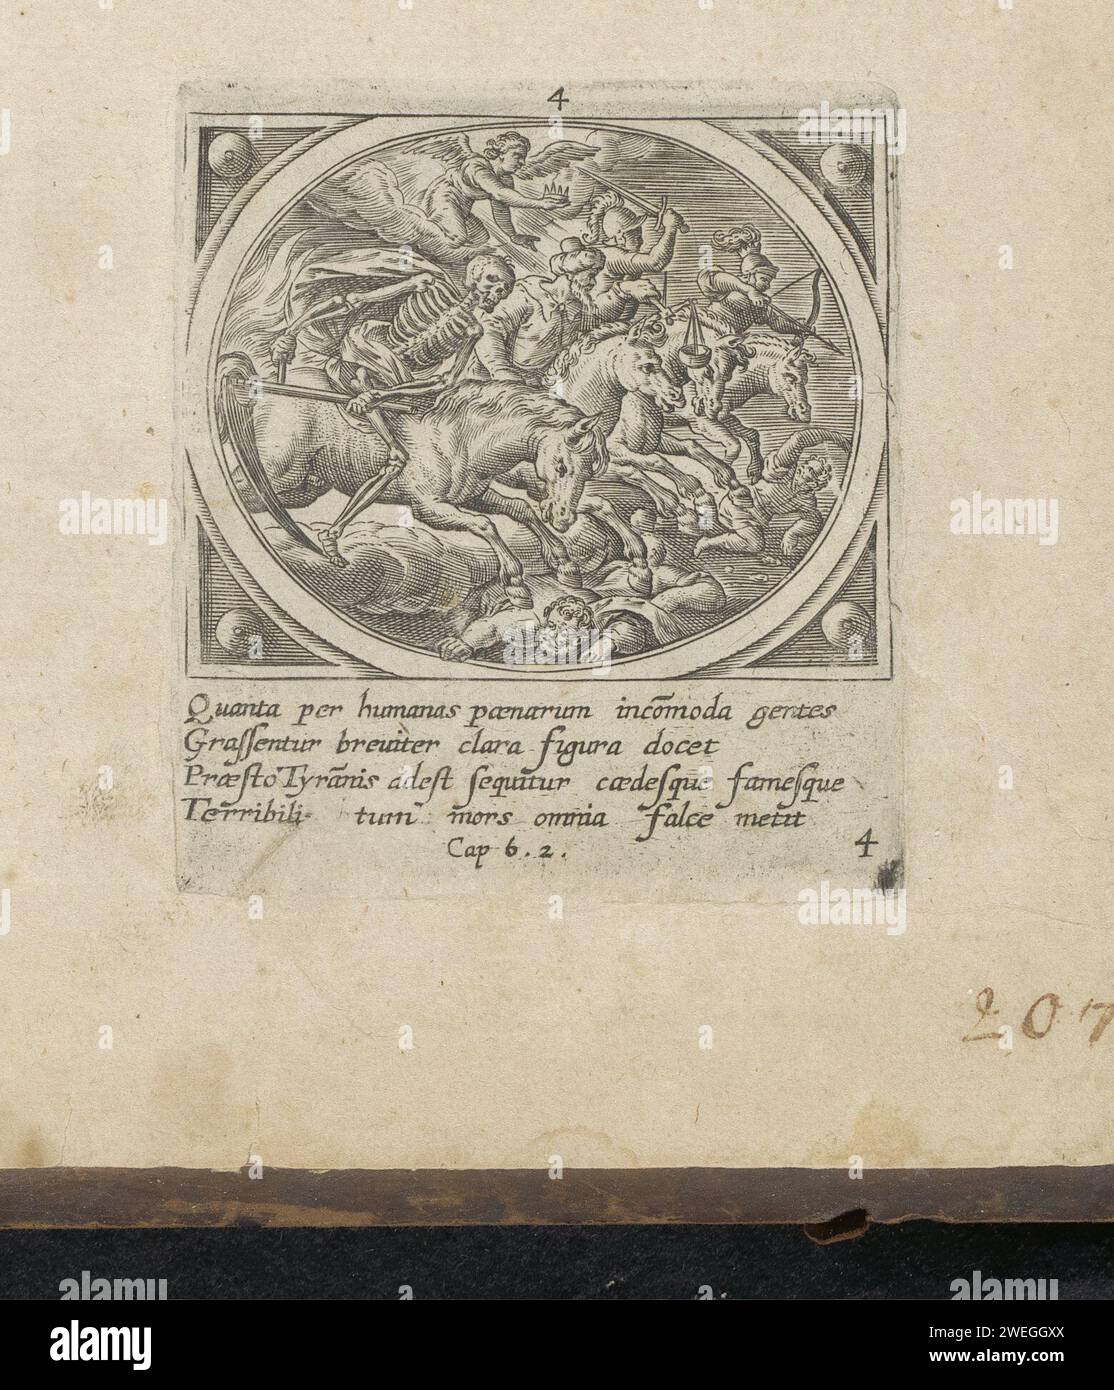 The four Apocalyptic riders, Adriaen Collaert (Attributed to), after Jan Snellinck (I), 1646 print Opening the first four stamps: the four Apocalyptic riders, 'Victorie', 'War', 'Hunger' and 'Death' trample humanity. Above them an angel, with a crown. Under the show a reference in Latin to the Bible text in op. 6. This print is part of an album.  paper engraving the four horsemen of the Apocalypse Stock Photo